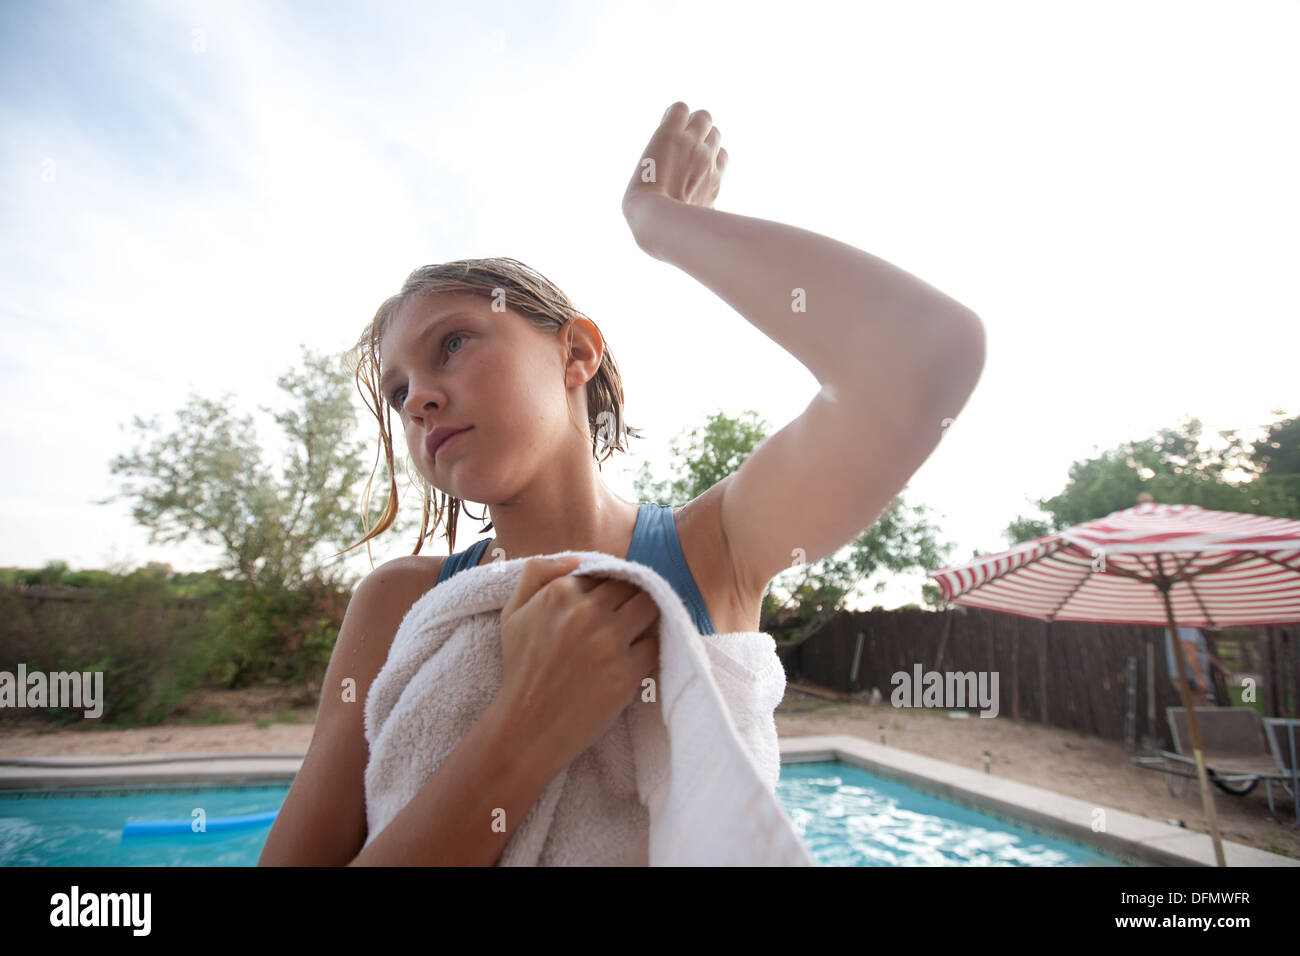 Ten year old girl shaking water out of her ear after swimming outdoors. Stock Photo